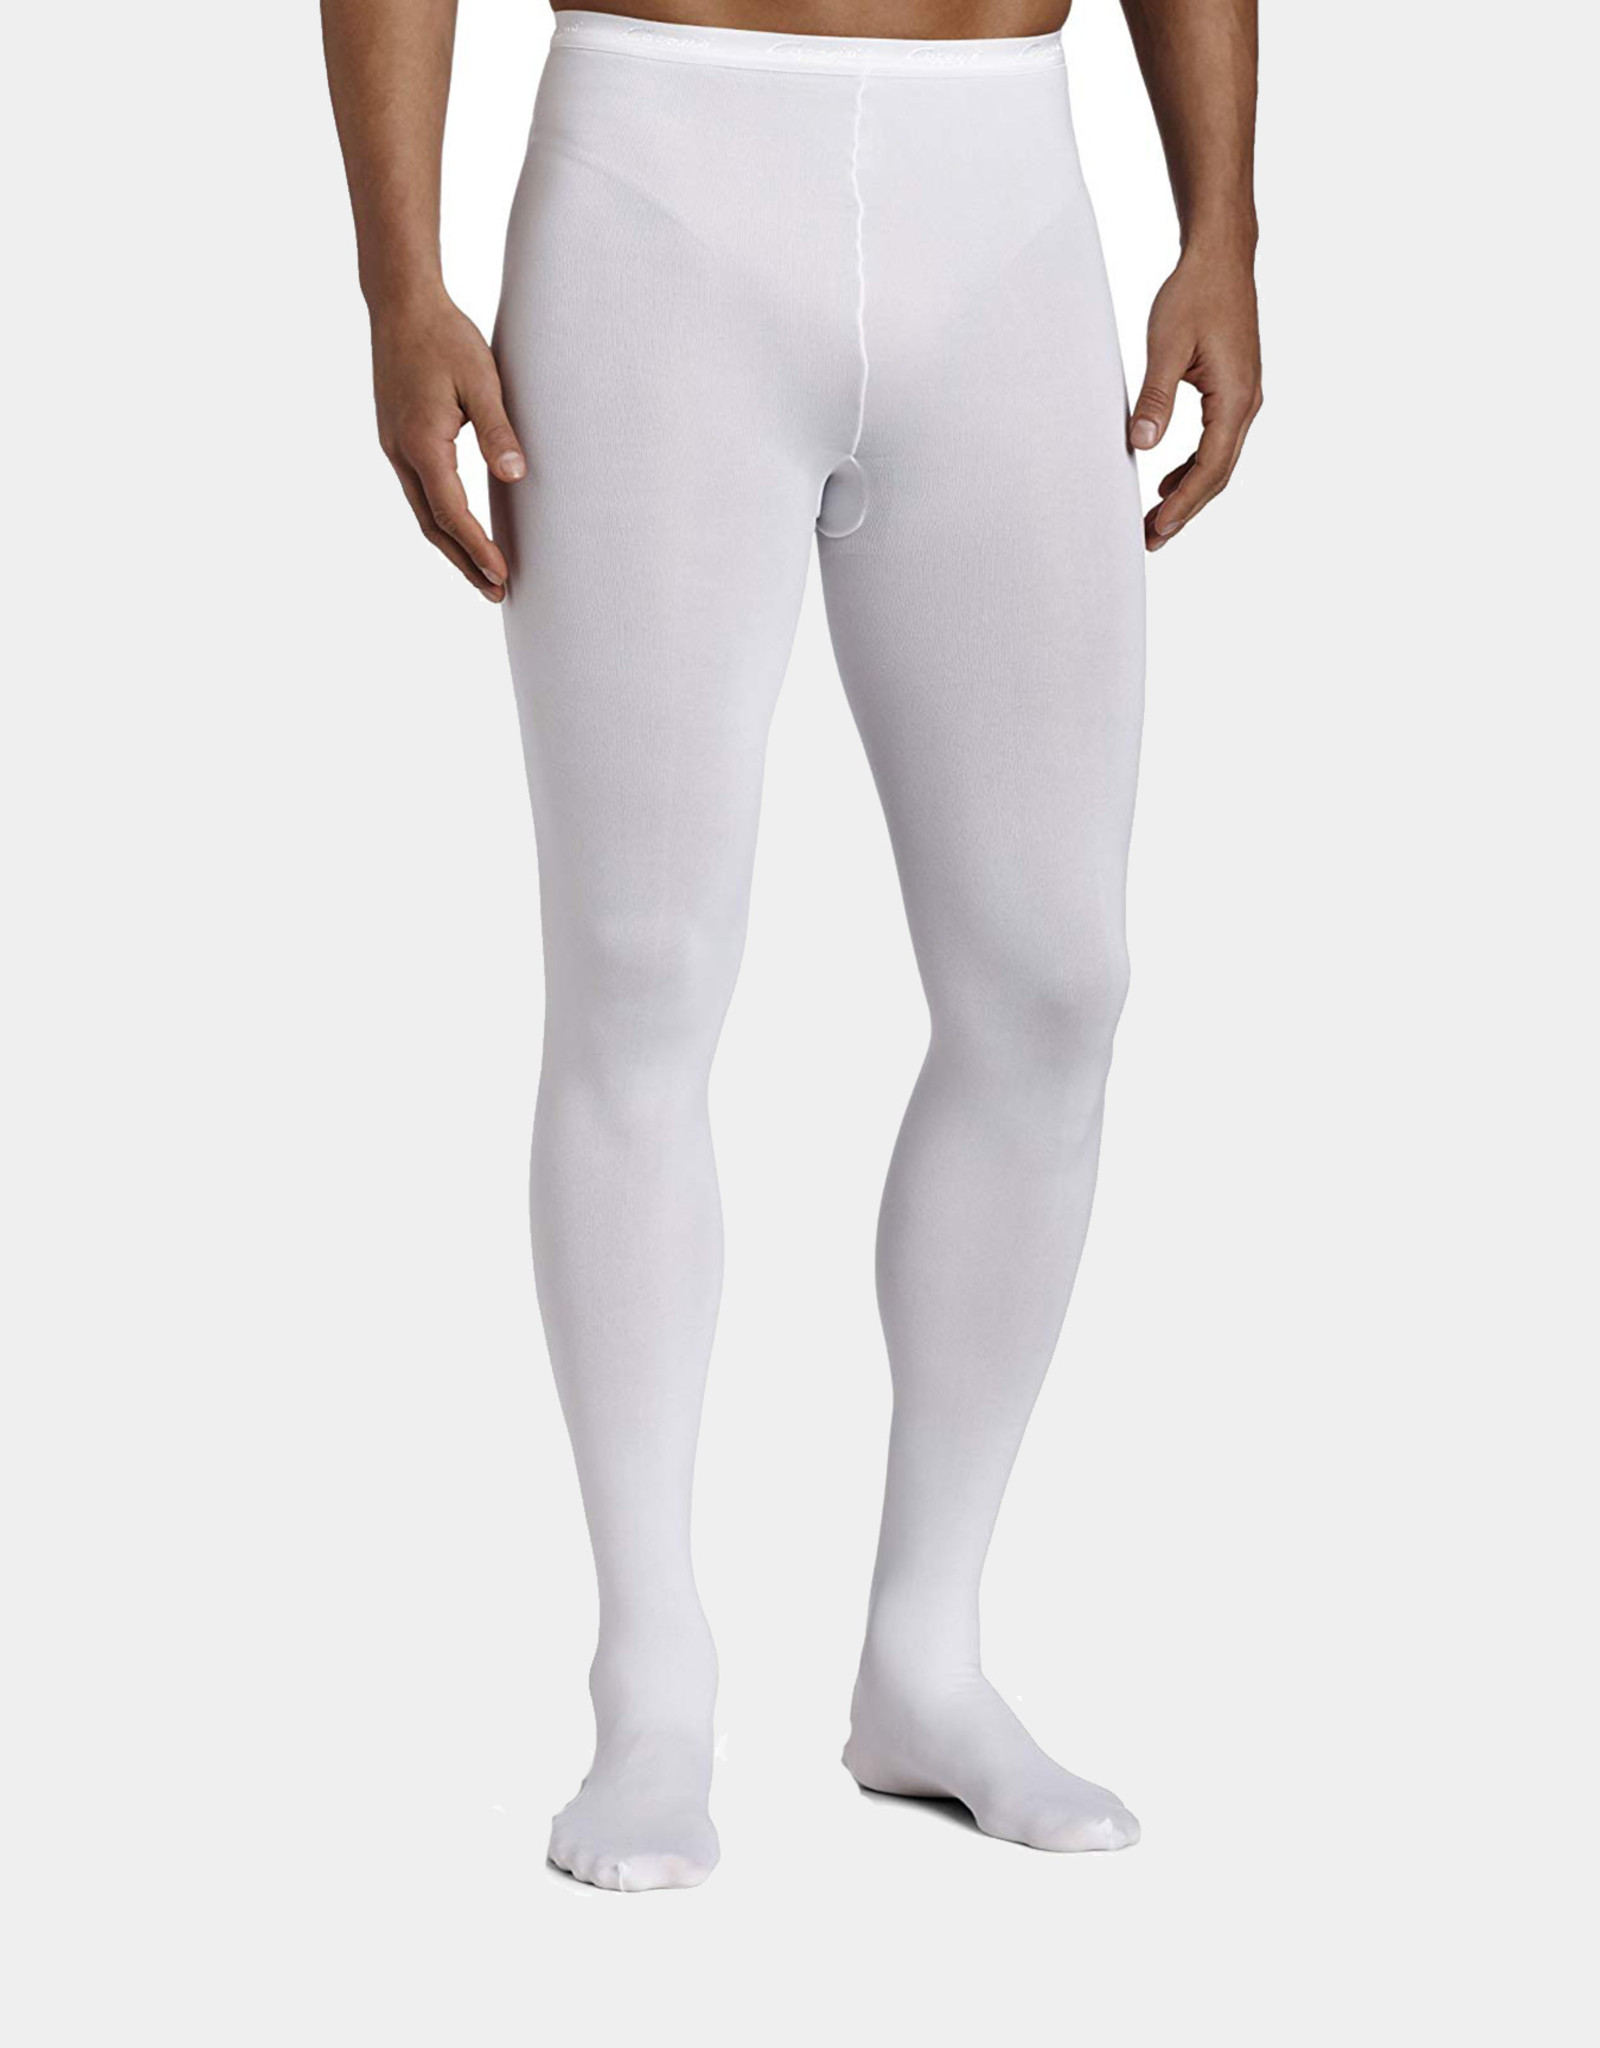 Capezio Men's Knit Footed Tights – Shelly's Dance and Costume